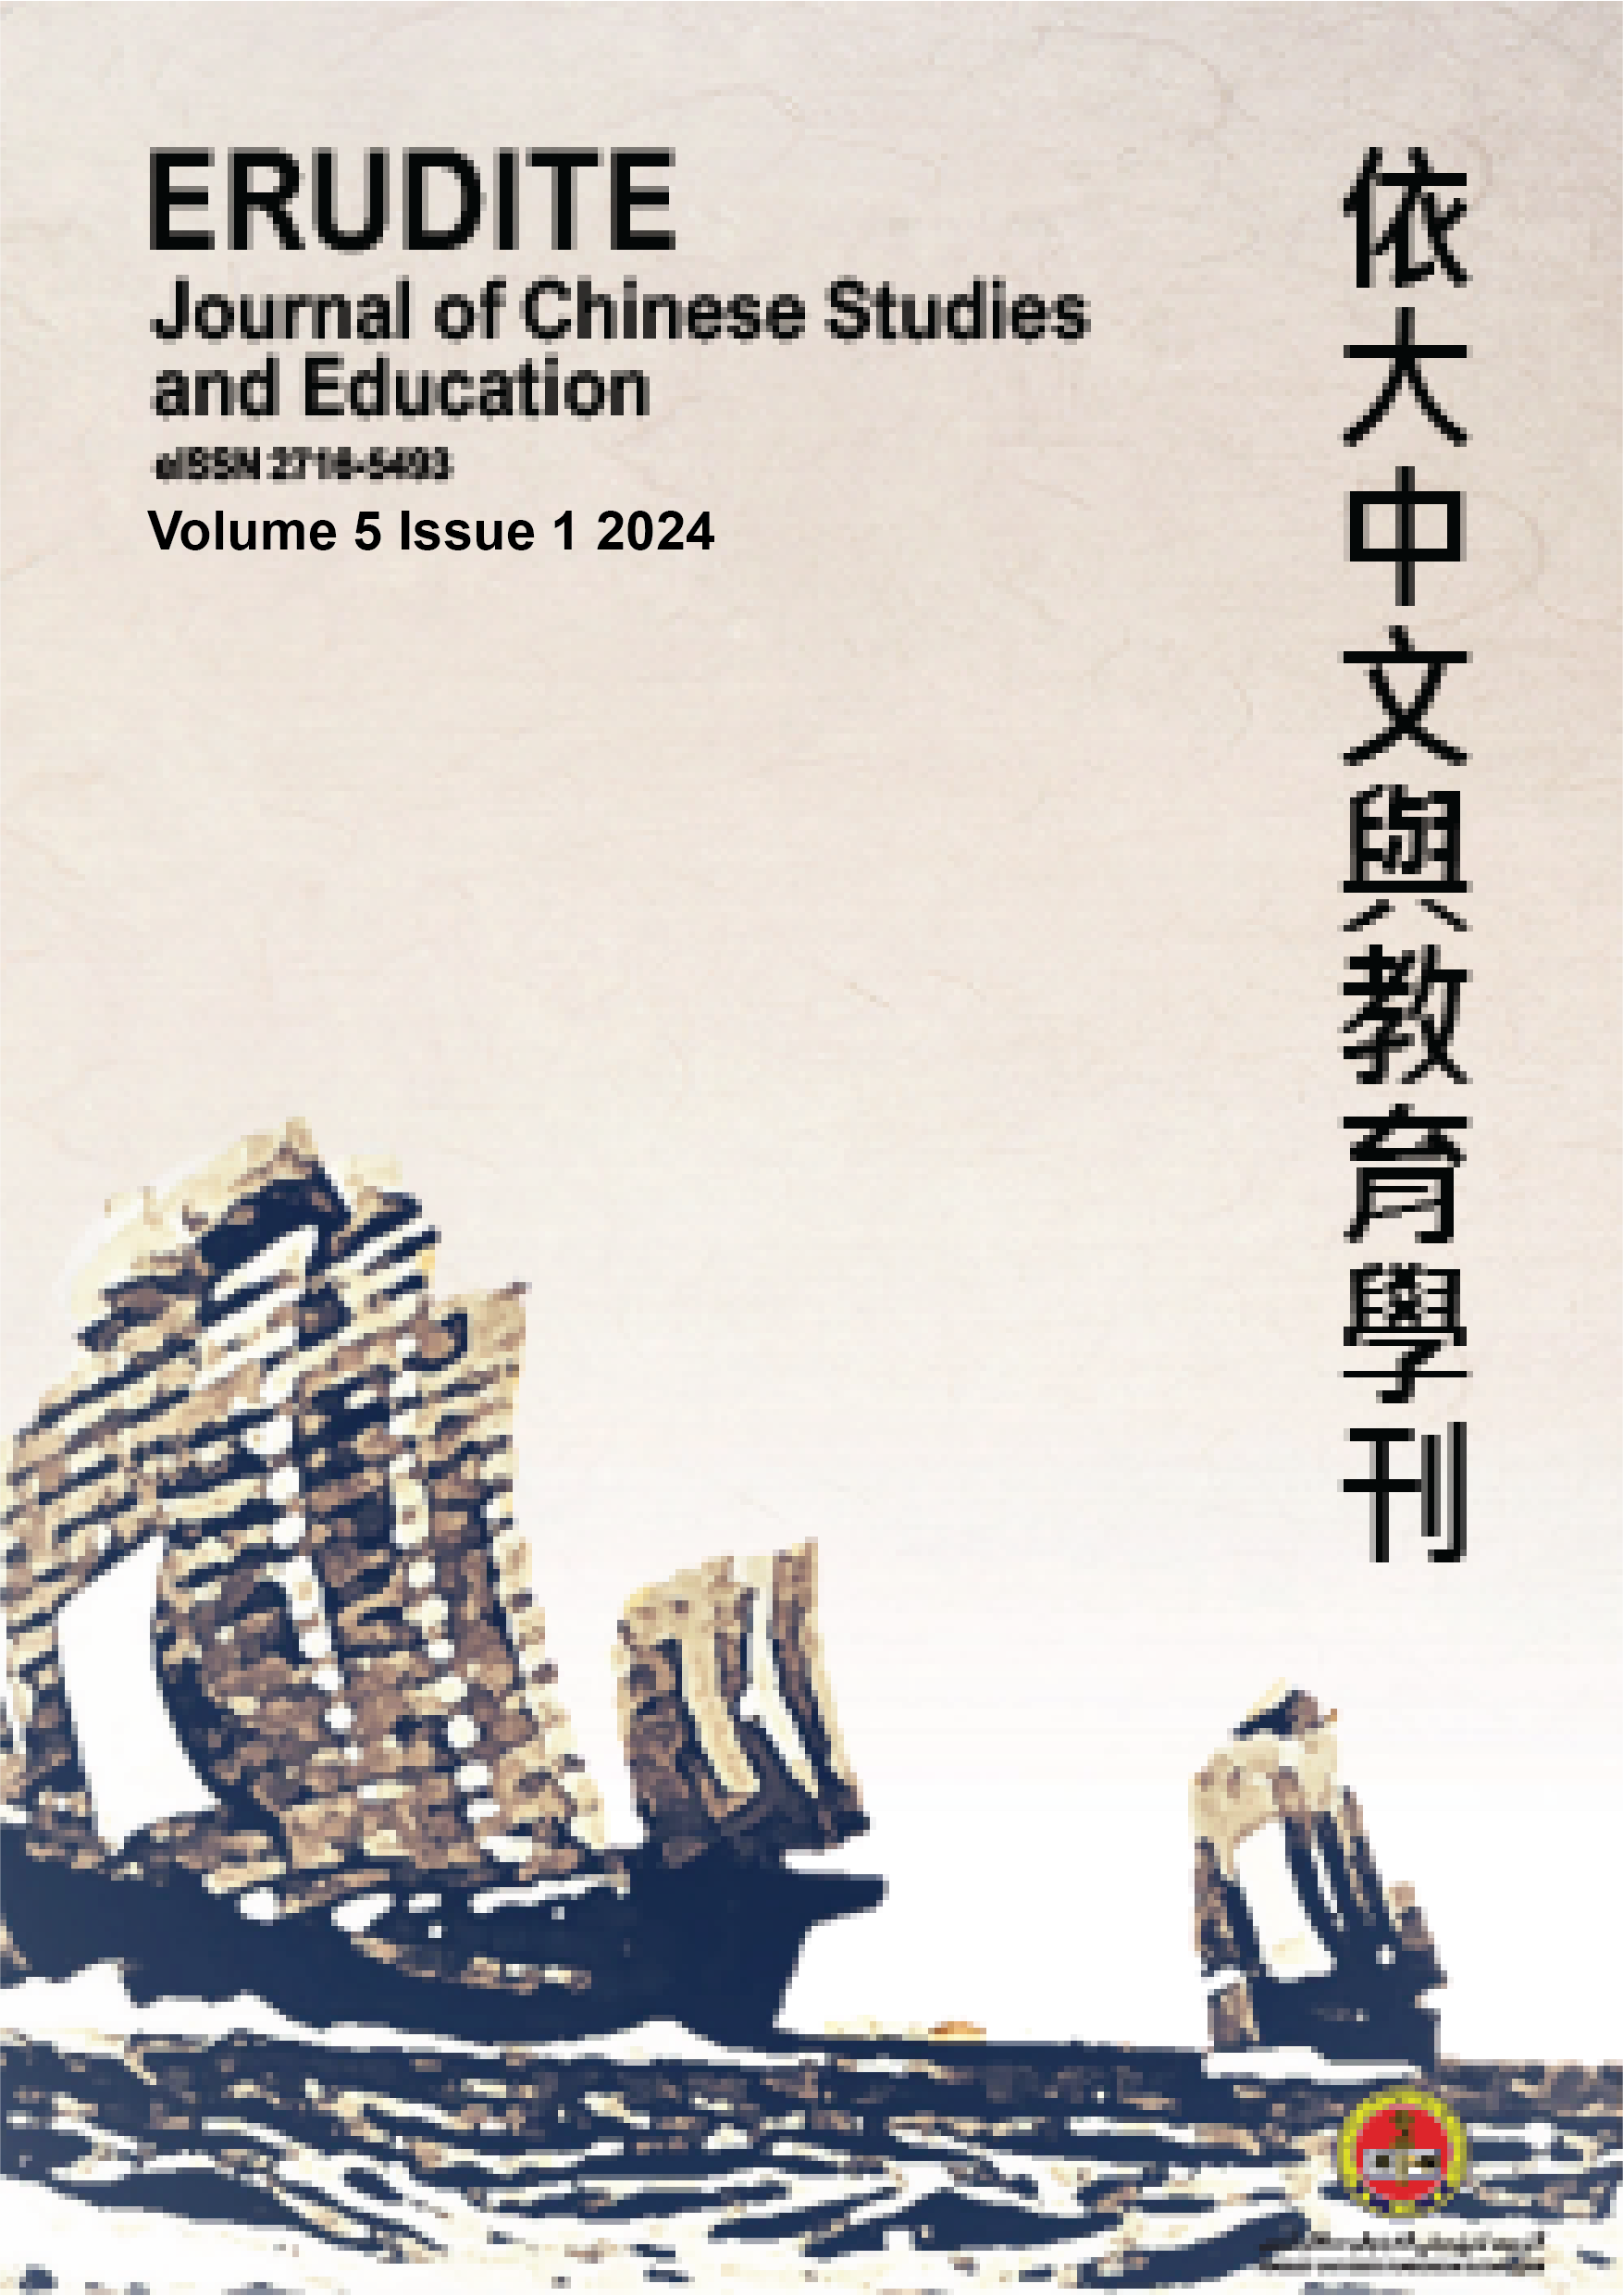 					View Vol. 5 No. 1 (2024): ERUDITE: Journal Of Chinese Studies And Education
				